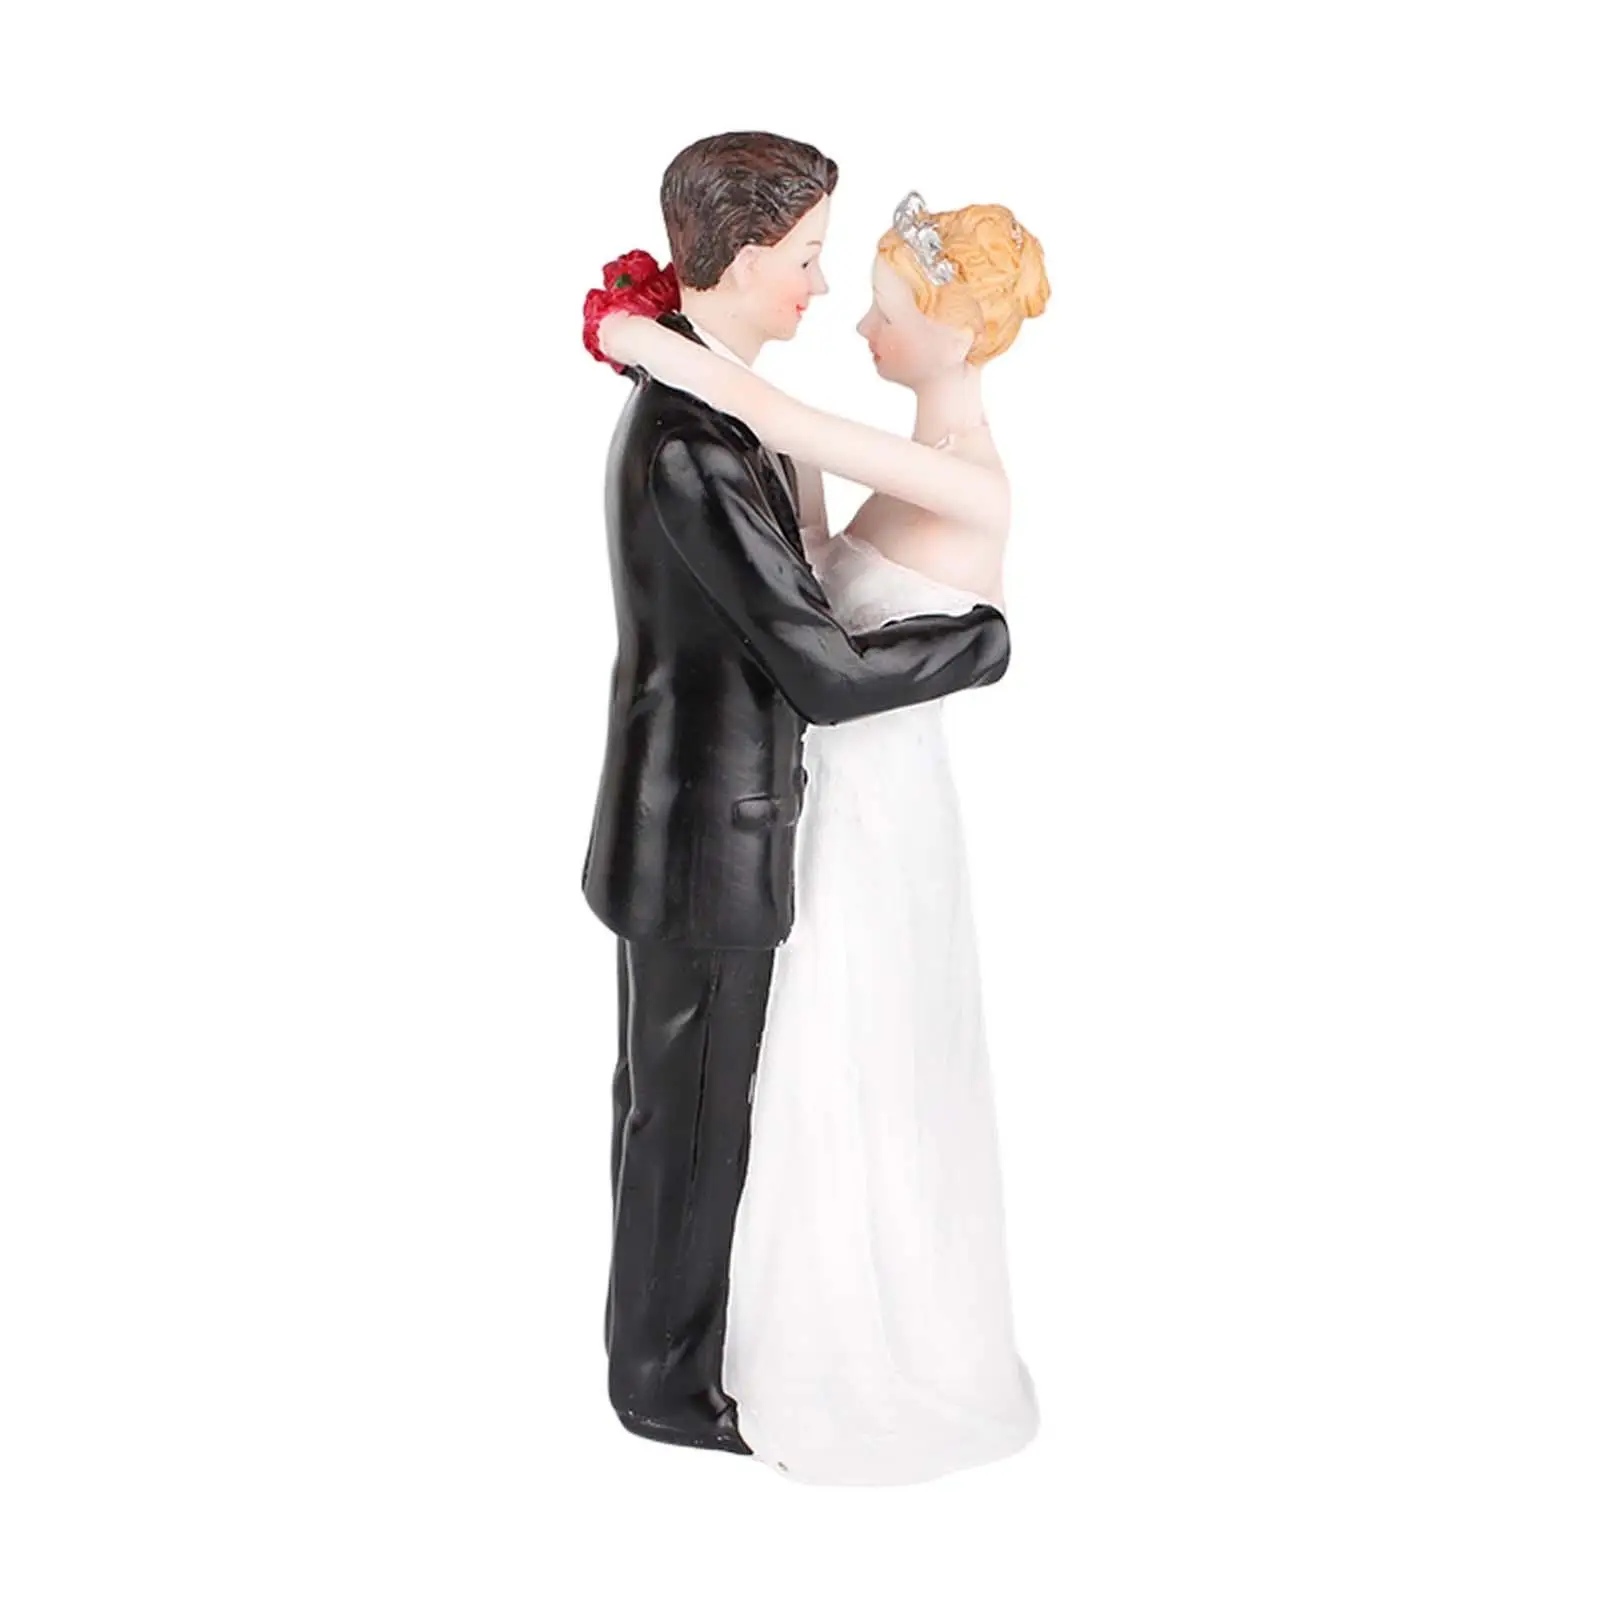 Wedding Cake Topper Couple Figurine 1x for Engagement Ready to Marry Gifts